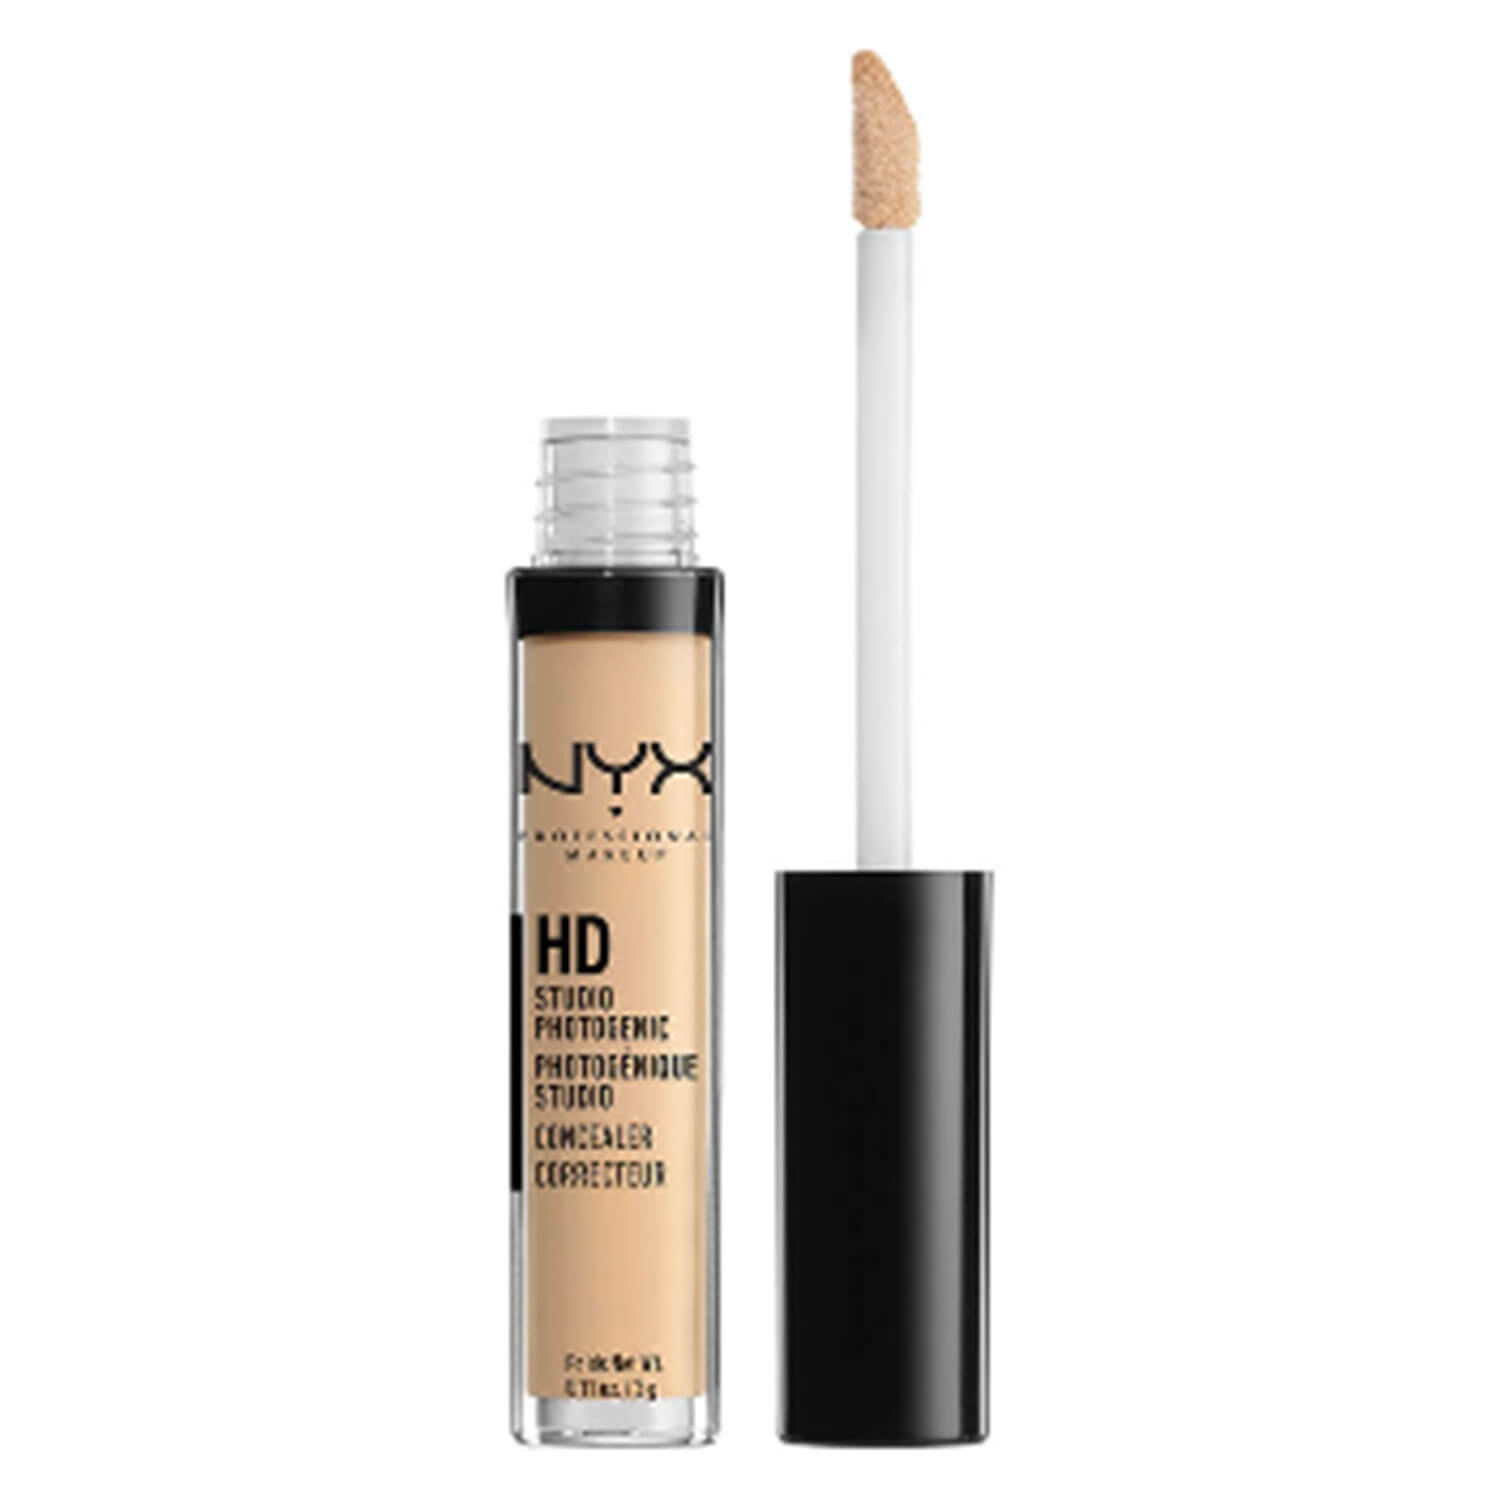 Product image from NYX Concealer - HD Photogenic Wand Beige